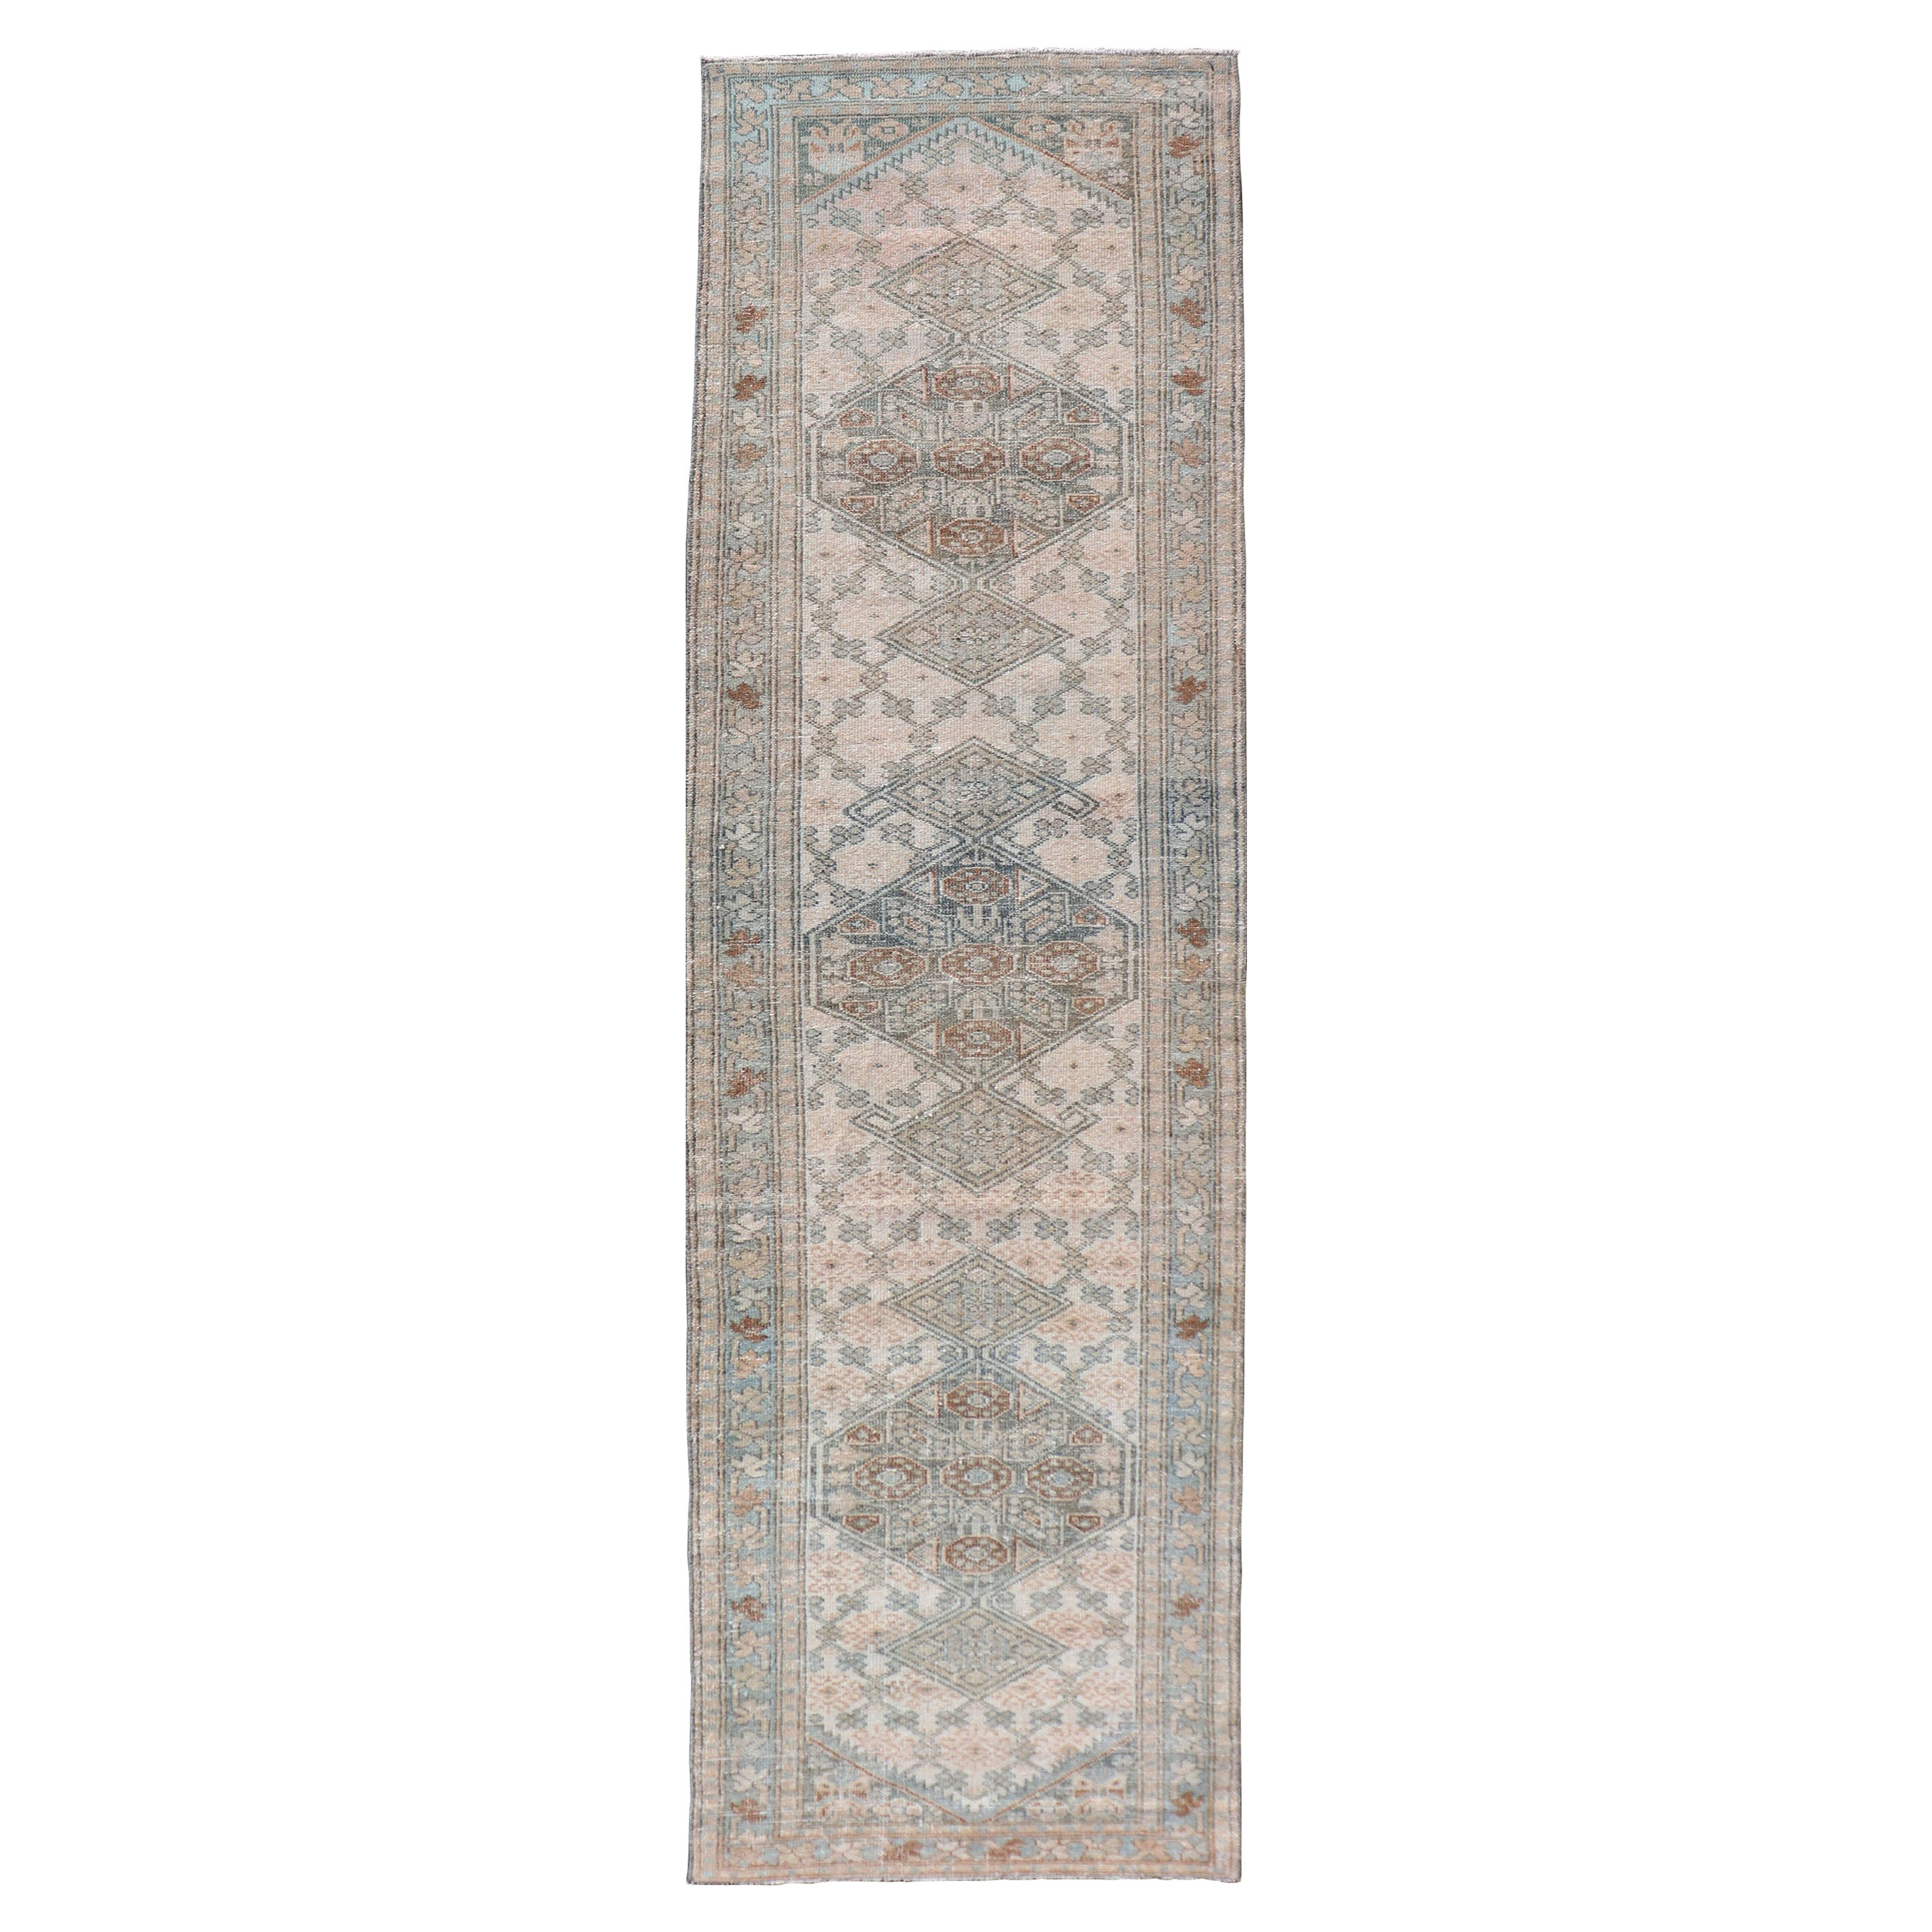 Antique Persian Sarab Runner with Sub-Geometric Design in Light Blue, Tan, Grey For Sale